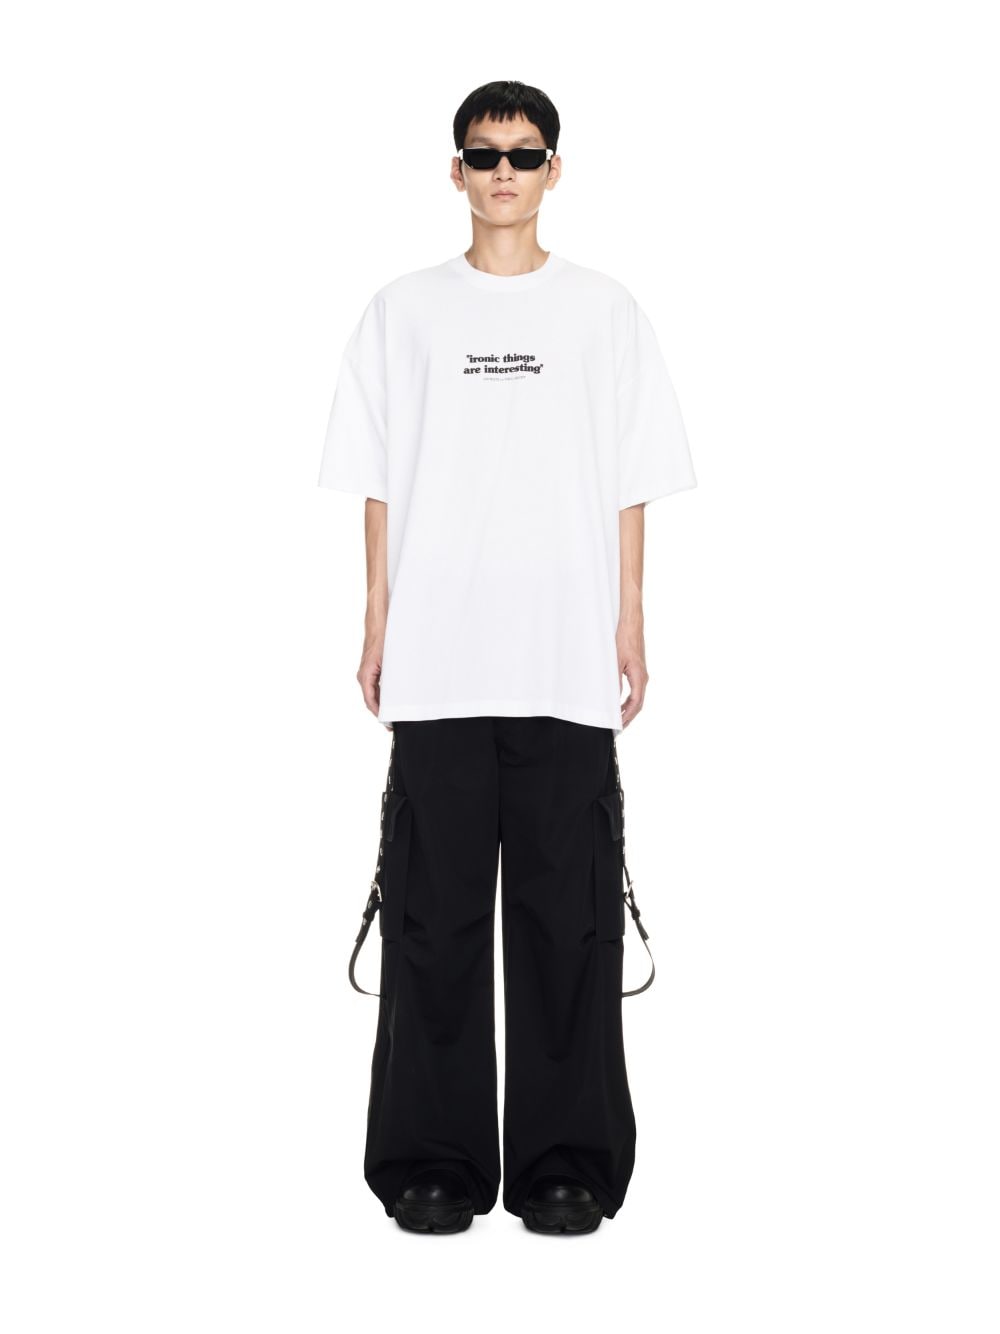 Ironic Quote Over S/S Tee on Sale - Off-White™ Official US